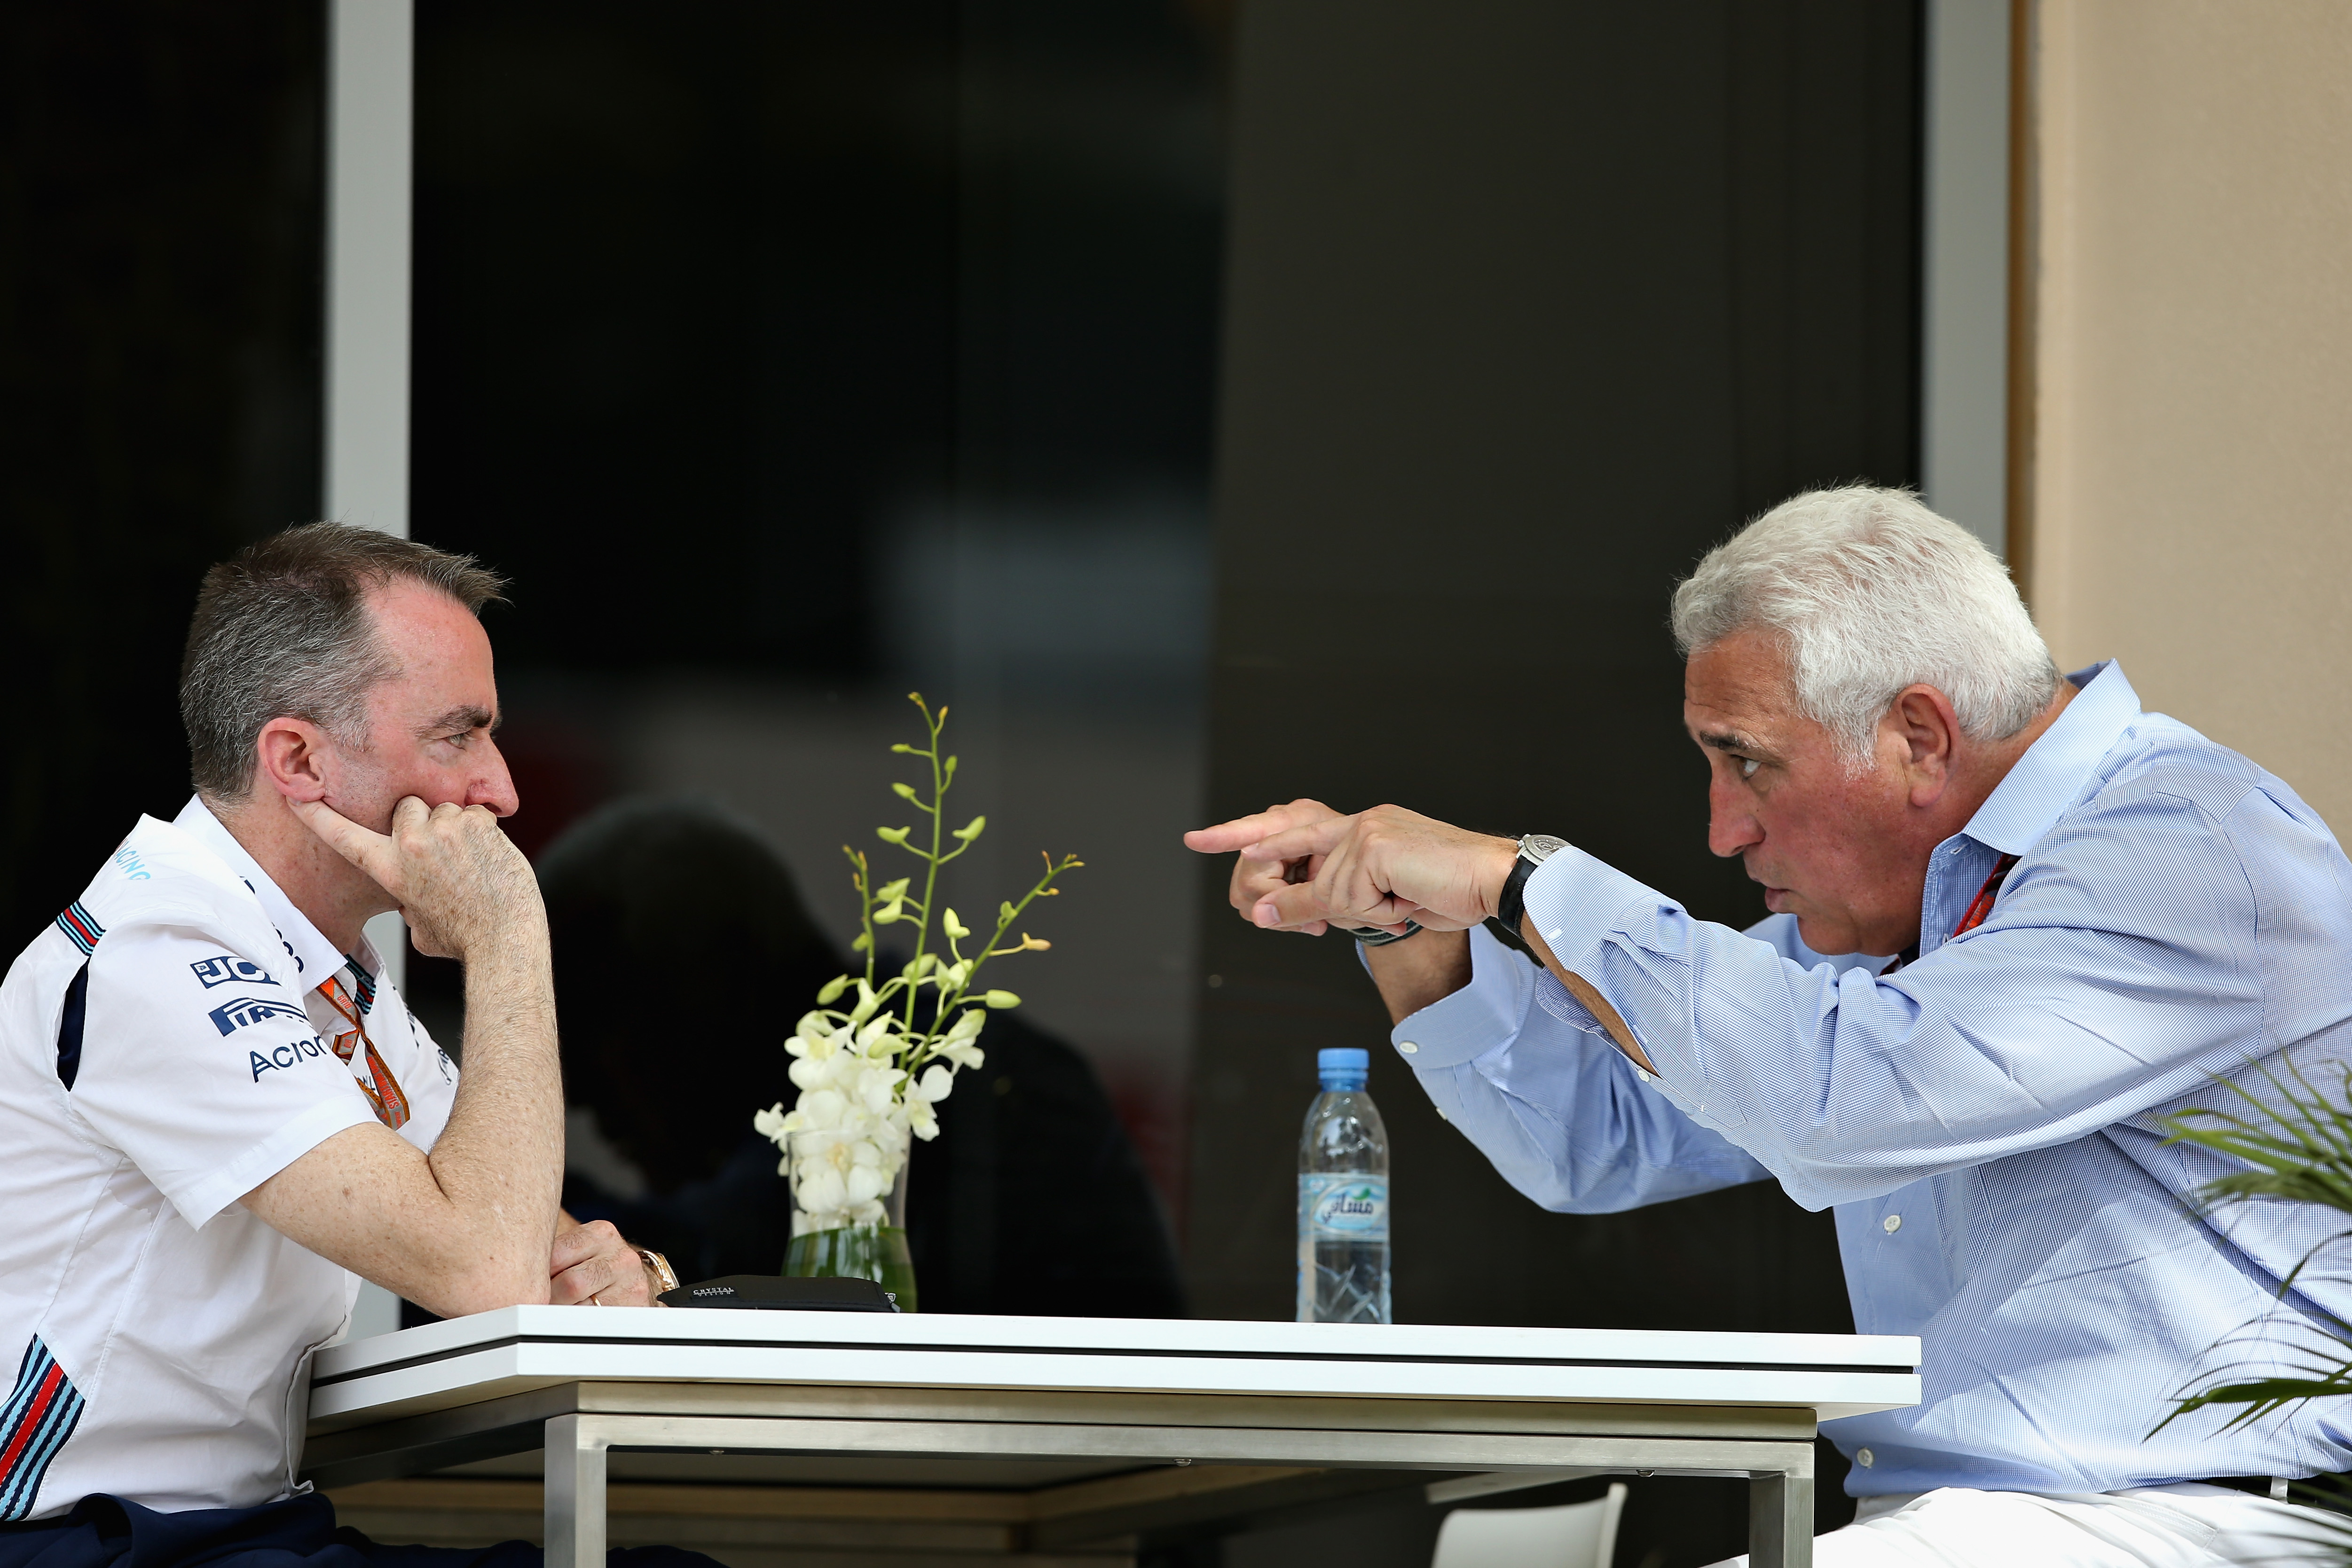 Lawrence Stroll talks with Paddy Lowe